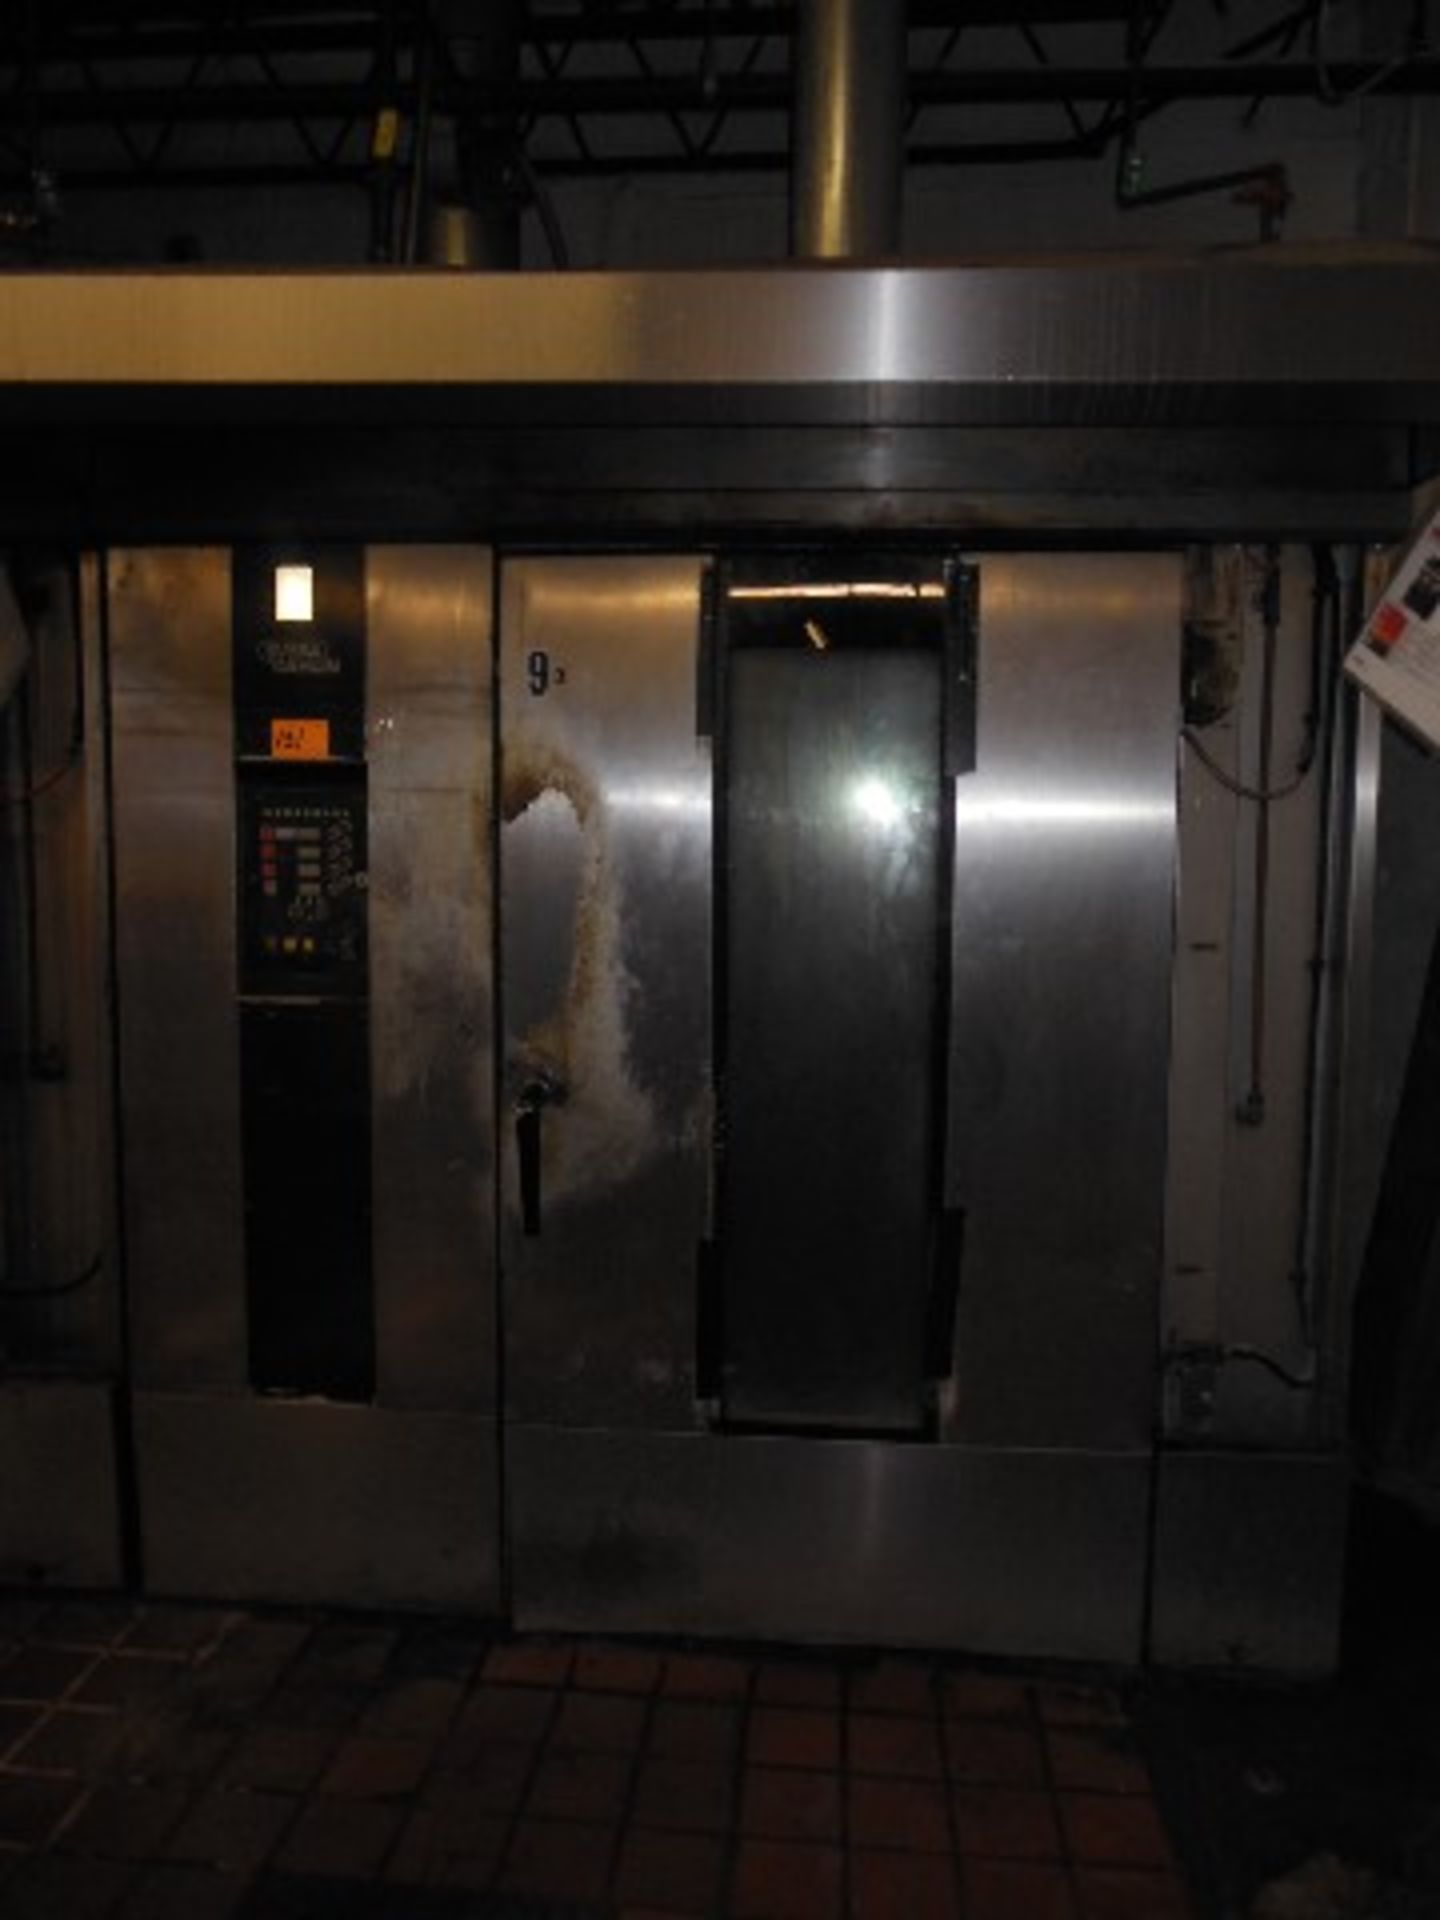 SVEBA DAHLIN SINGLE RACK OVEN, S/S CLAD, DIGITAL CONTROLS W/ STEEL VENT & DUCT (SPECIAL REMOVAL)